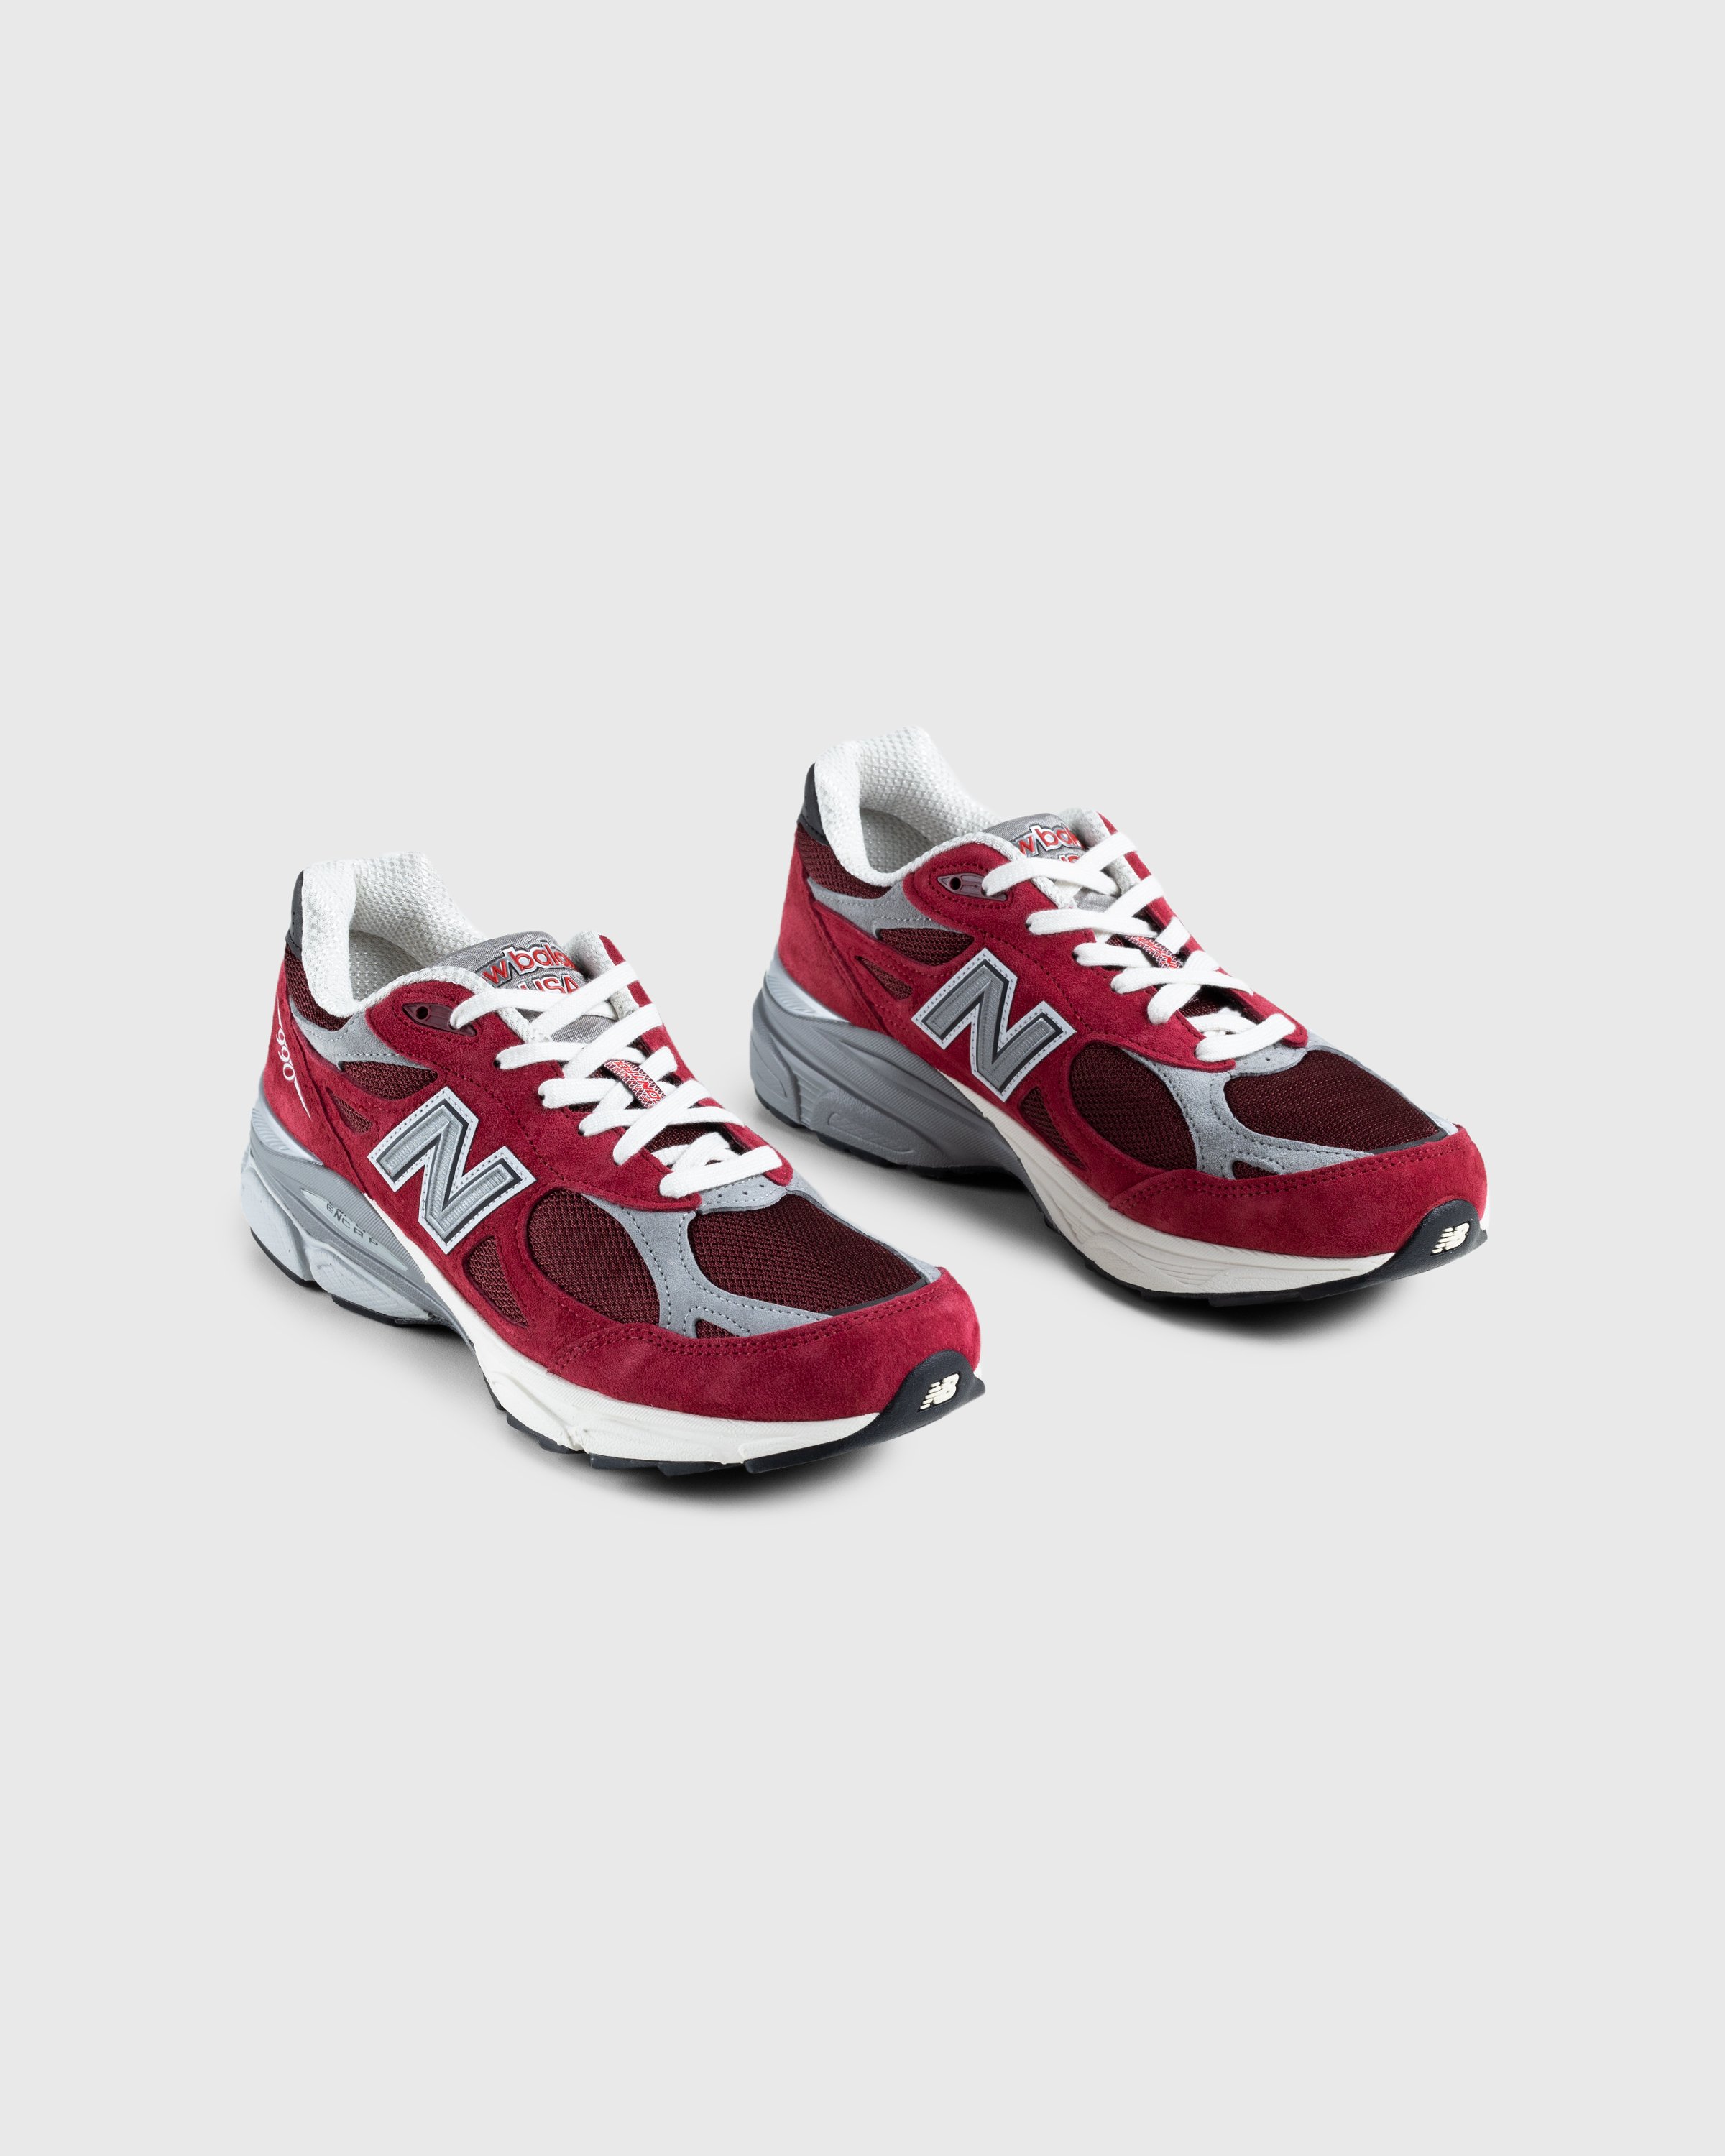 New Balance - M990TF3 Red - Footwear - Red - Image 3